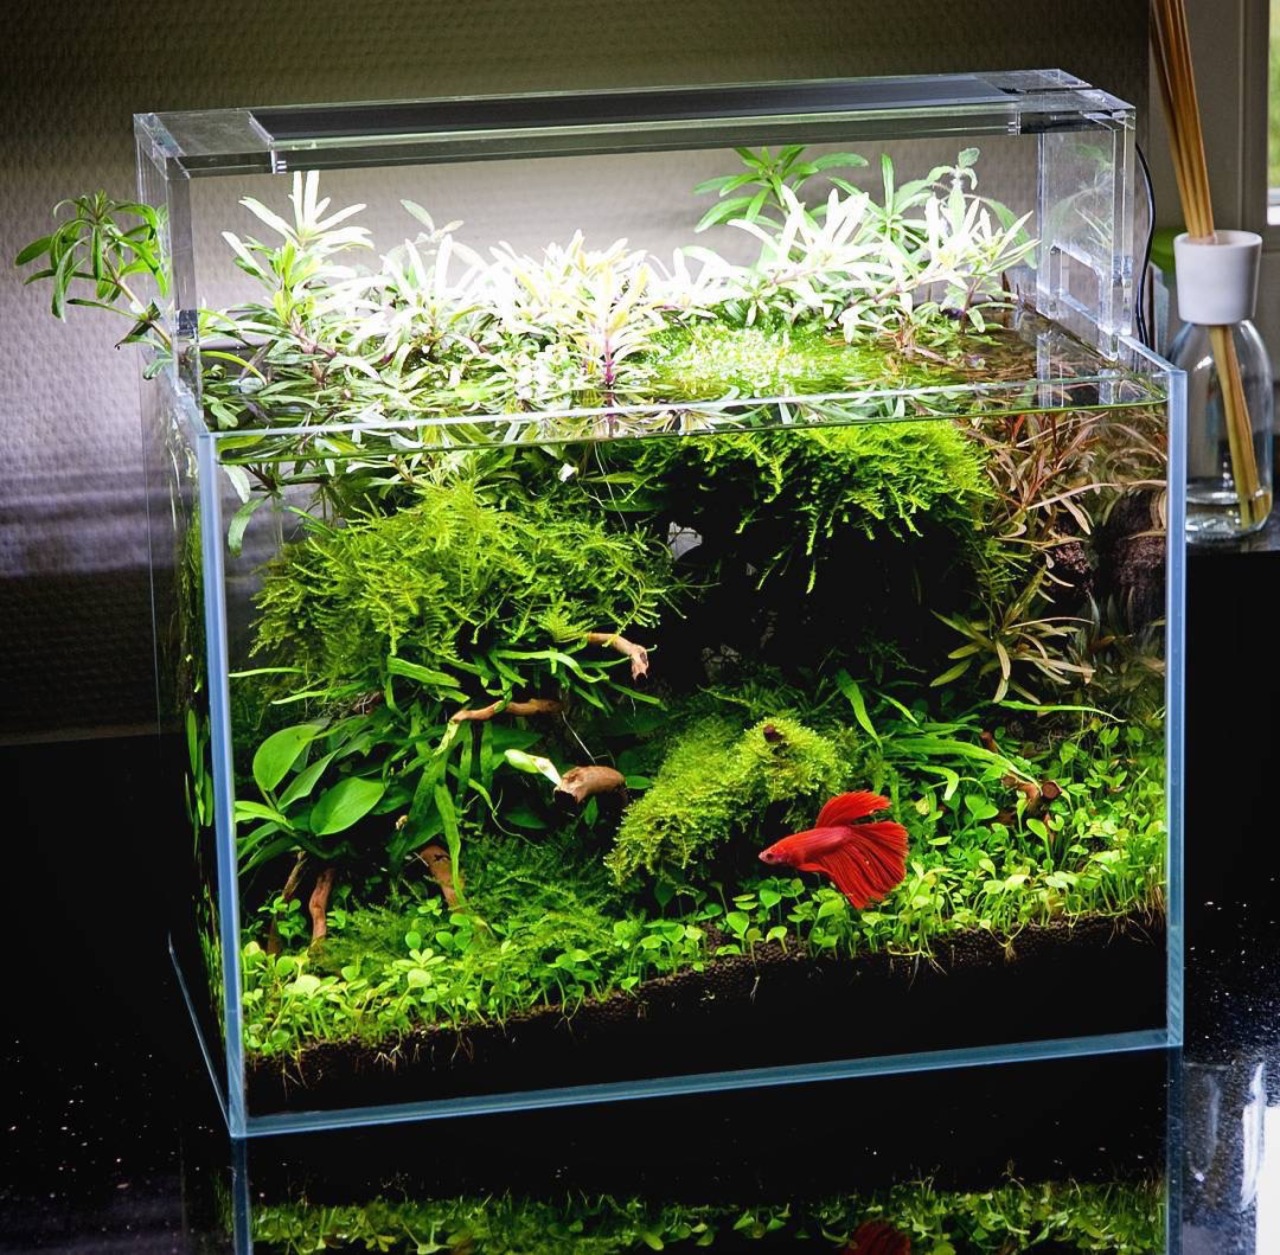 AQ*44 — Beautiful planted tank for a Betta with simple...